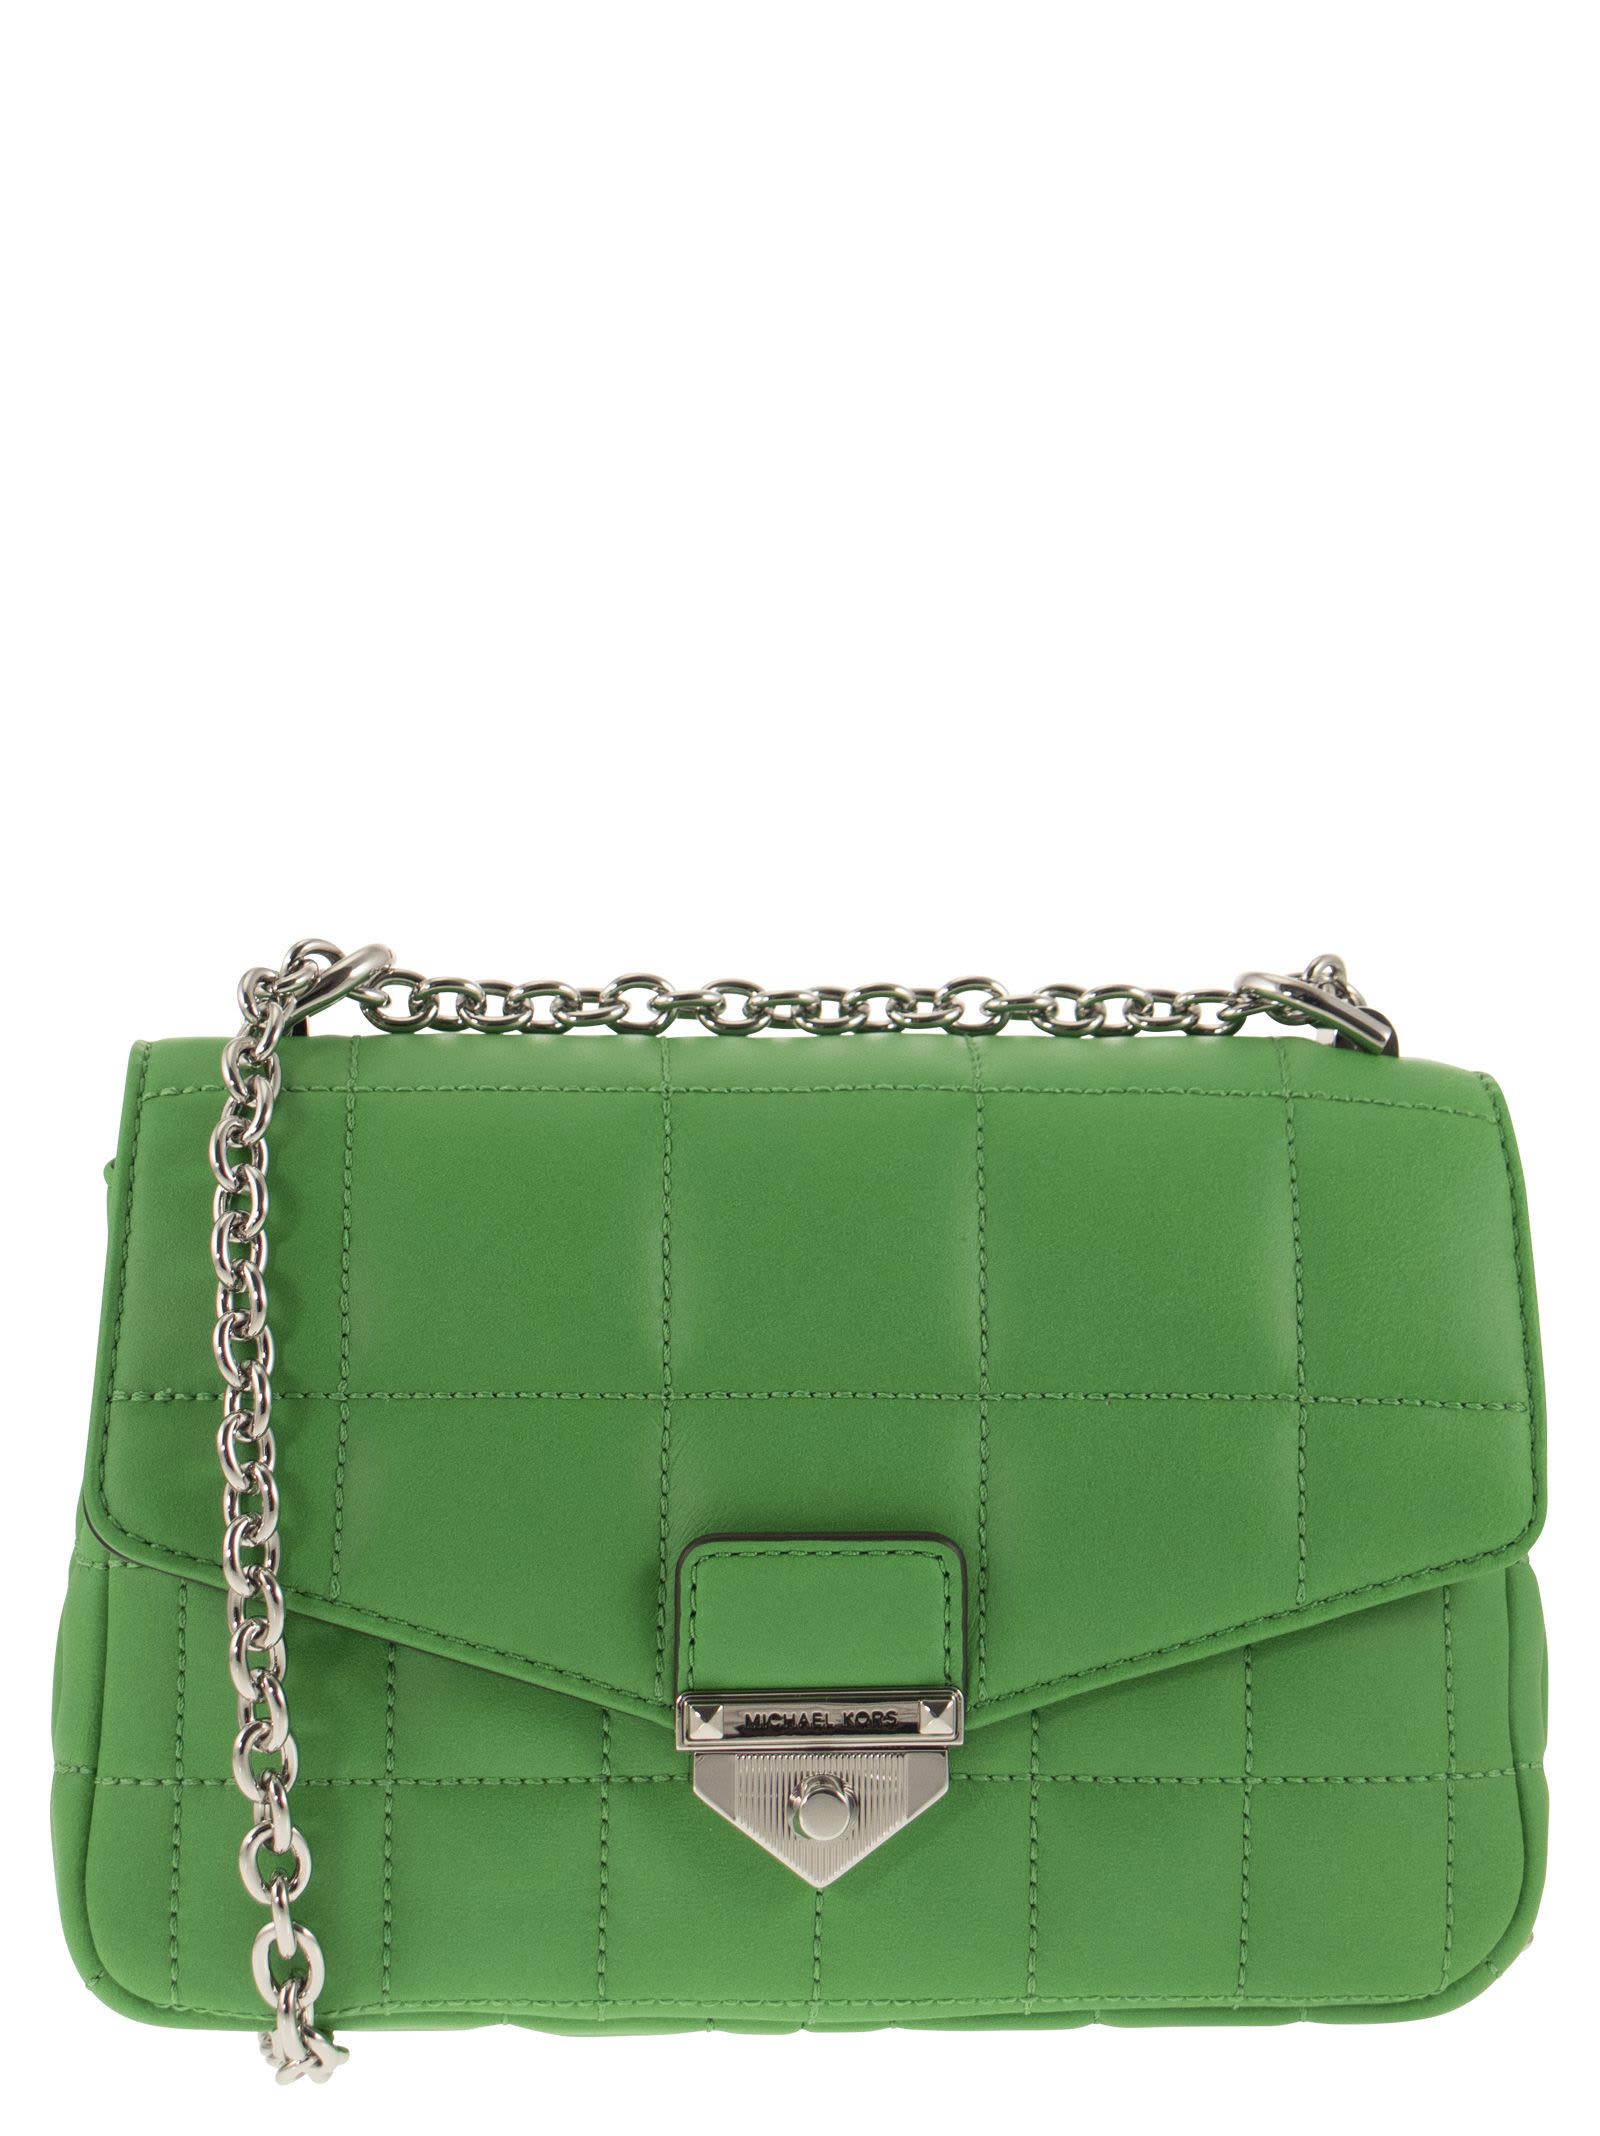 Michael Michael Kors Soho Small Quilted Leather Shoulder Bag